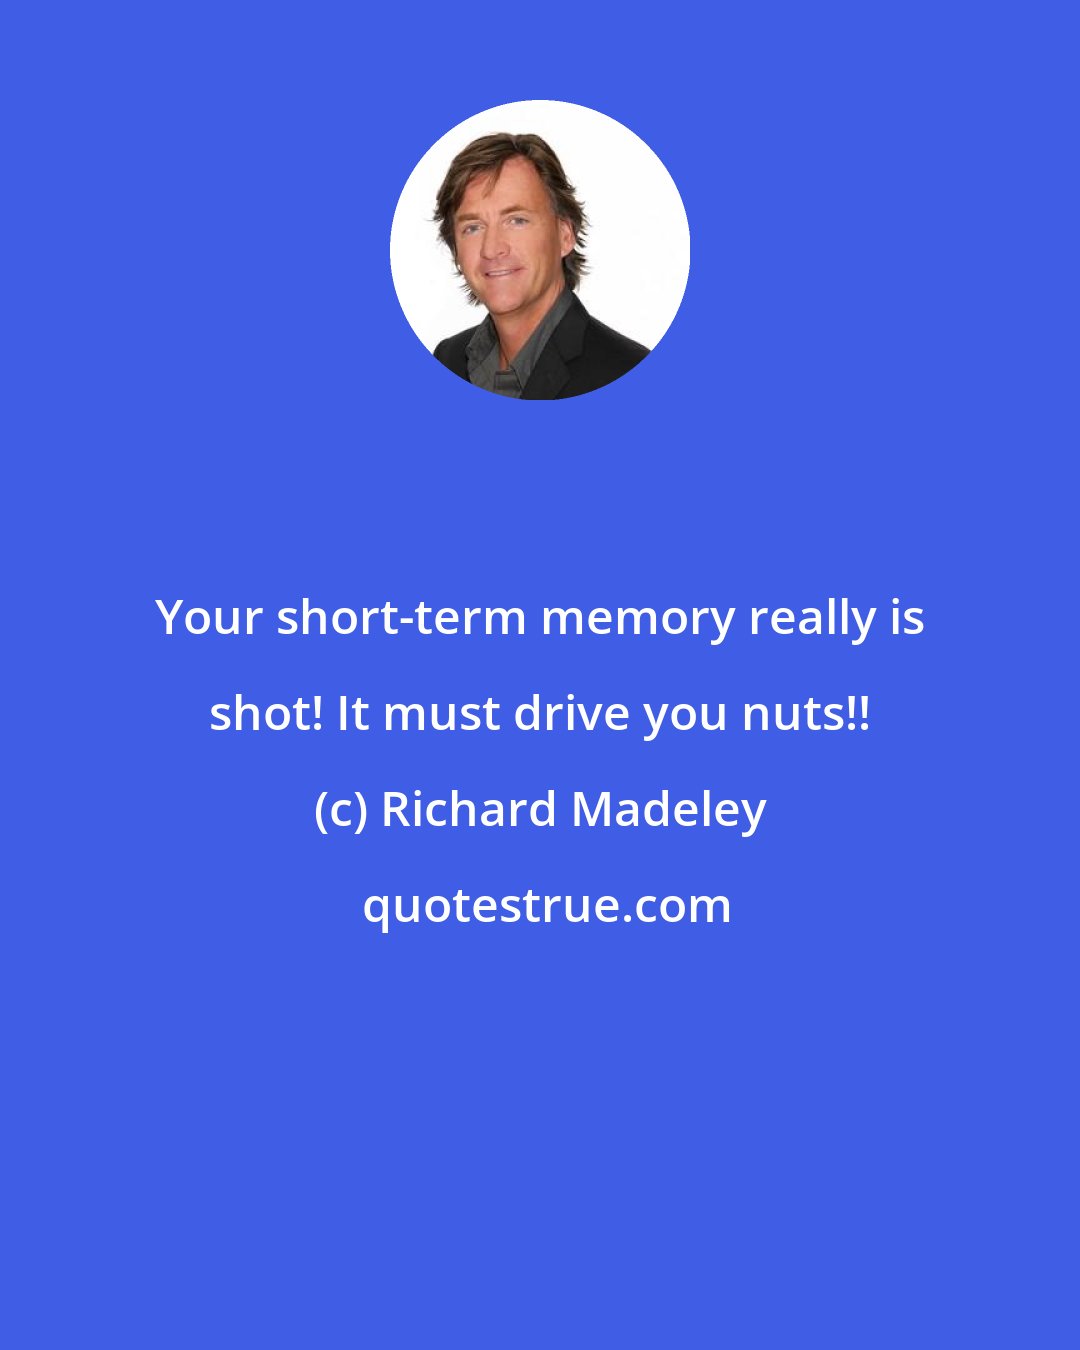 Richard Madeley: Your short-term memory really is shot! It must drive you nuts!!